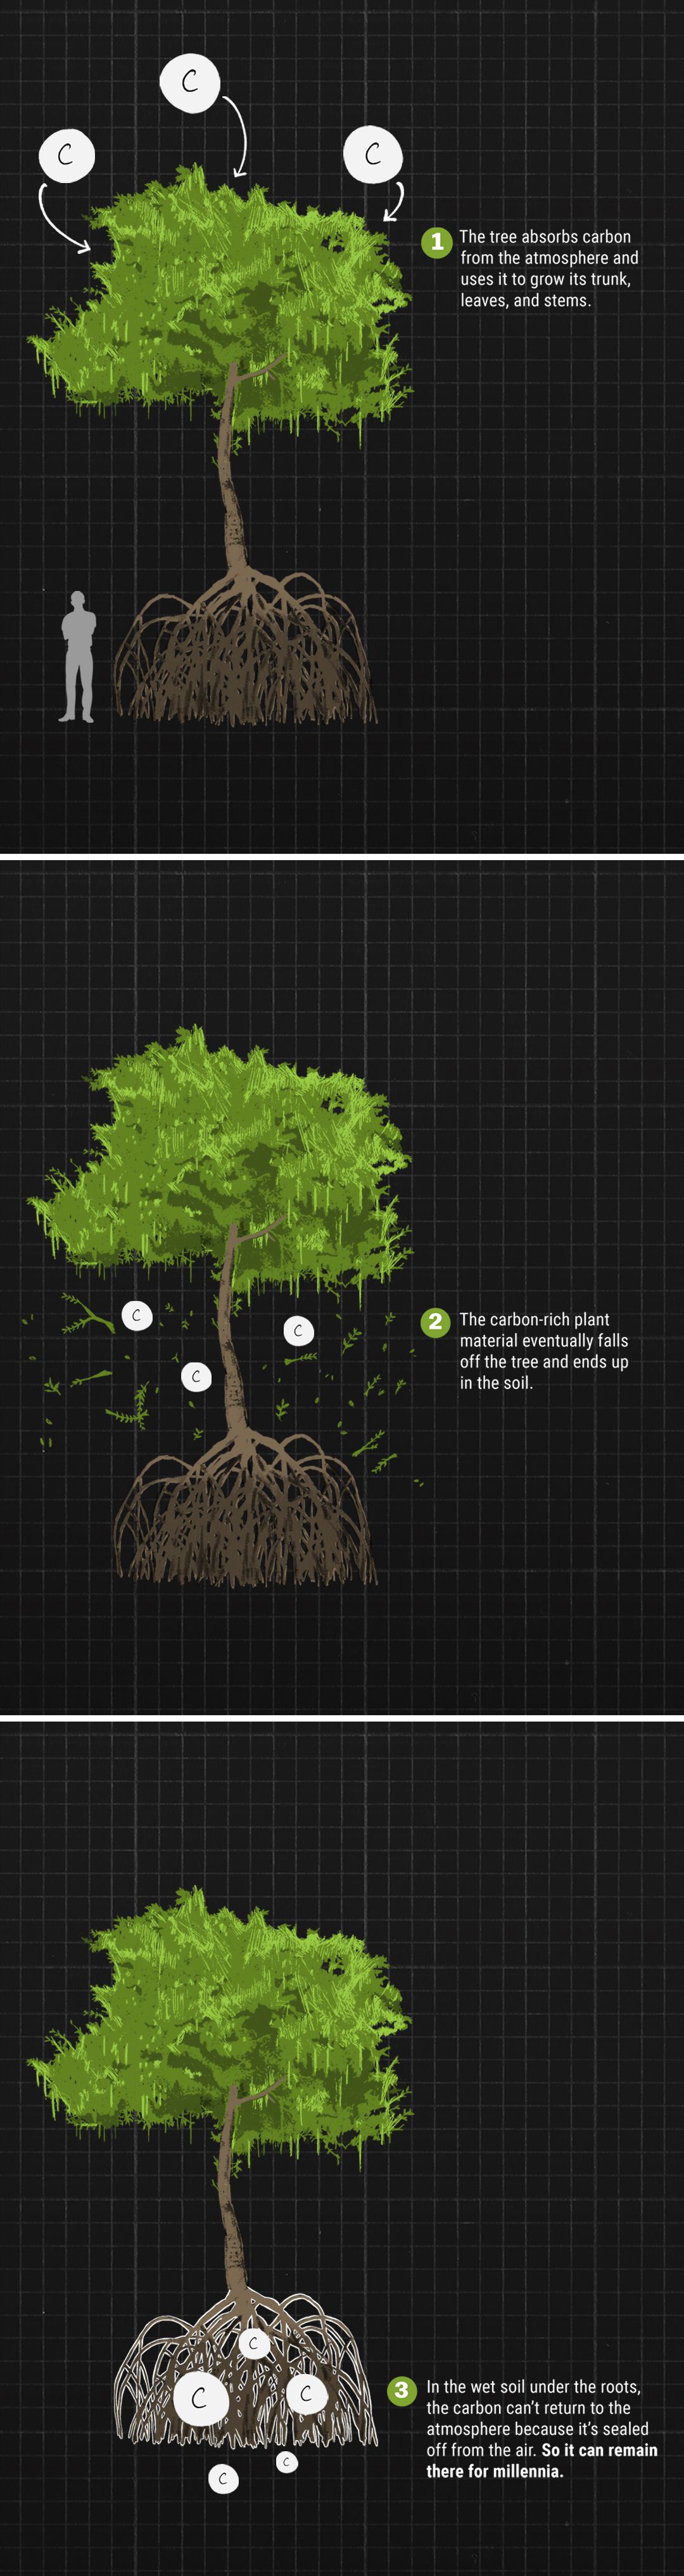 Graphic showing how the stilt mangrove absorbs carbon dioxide from the atmosphere. 